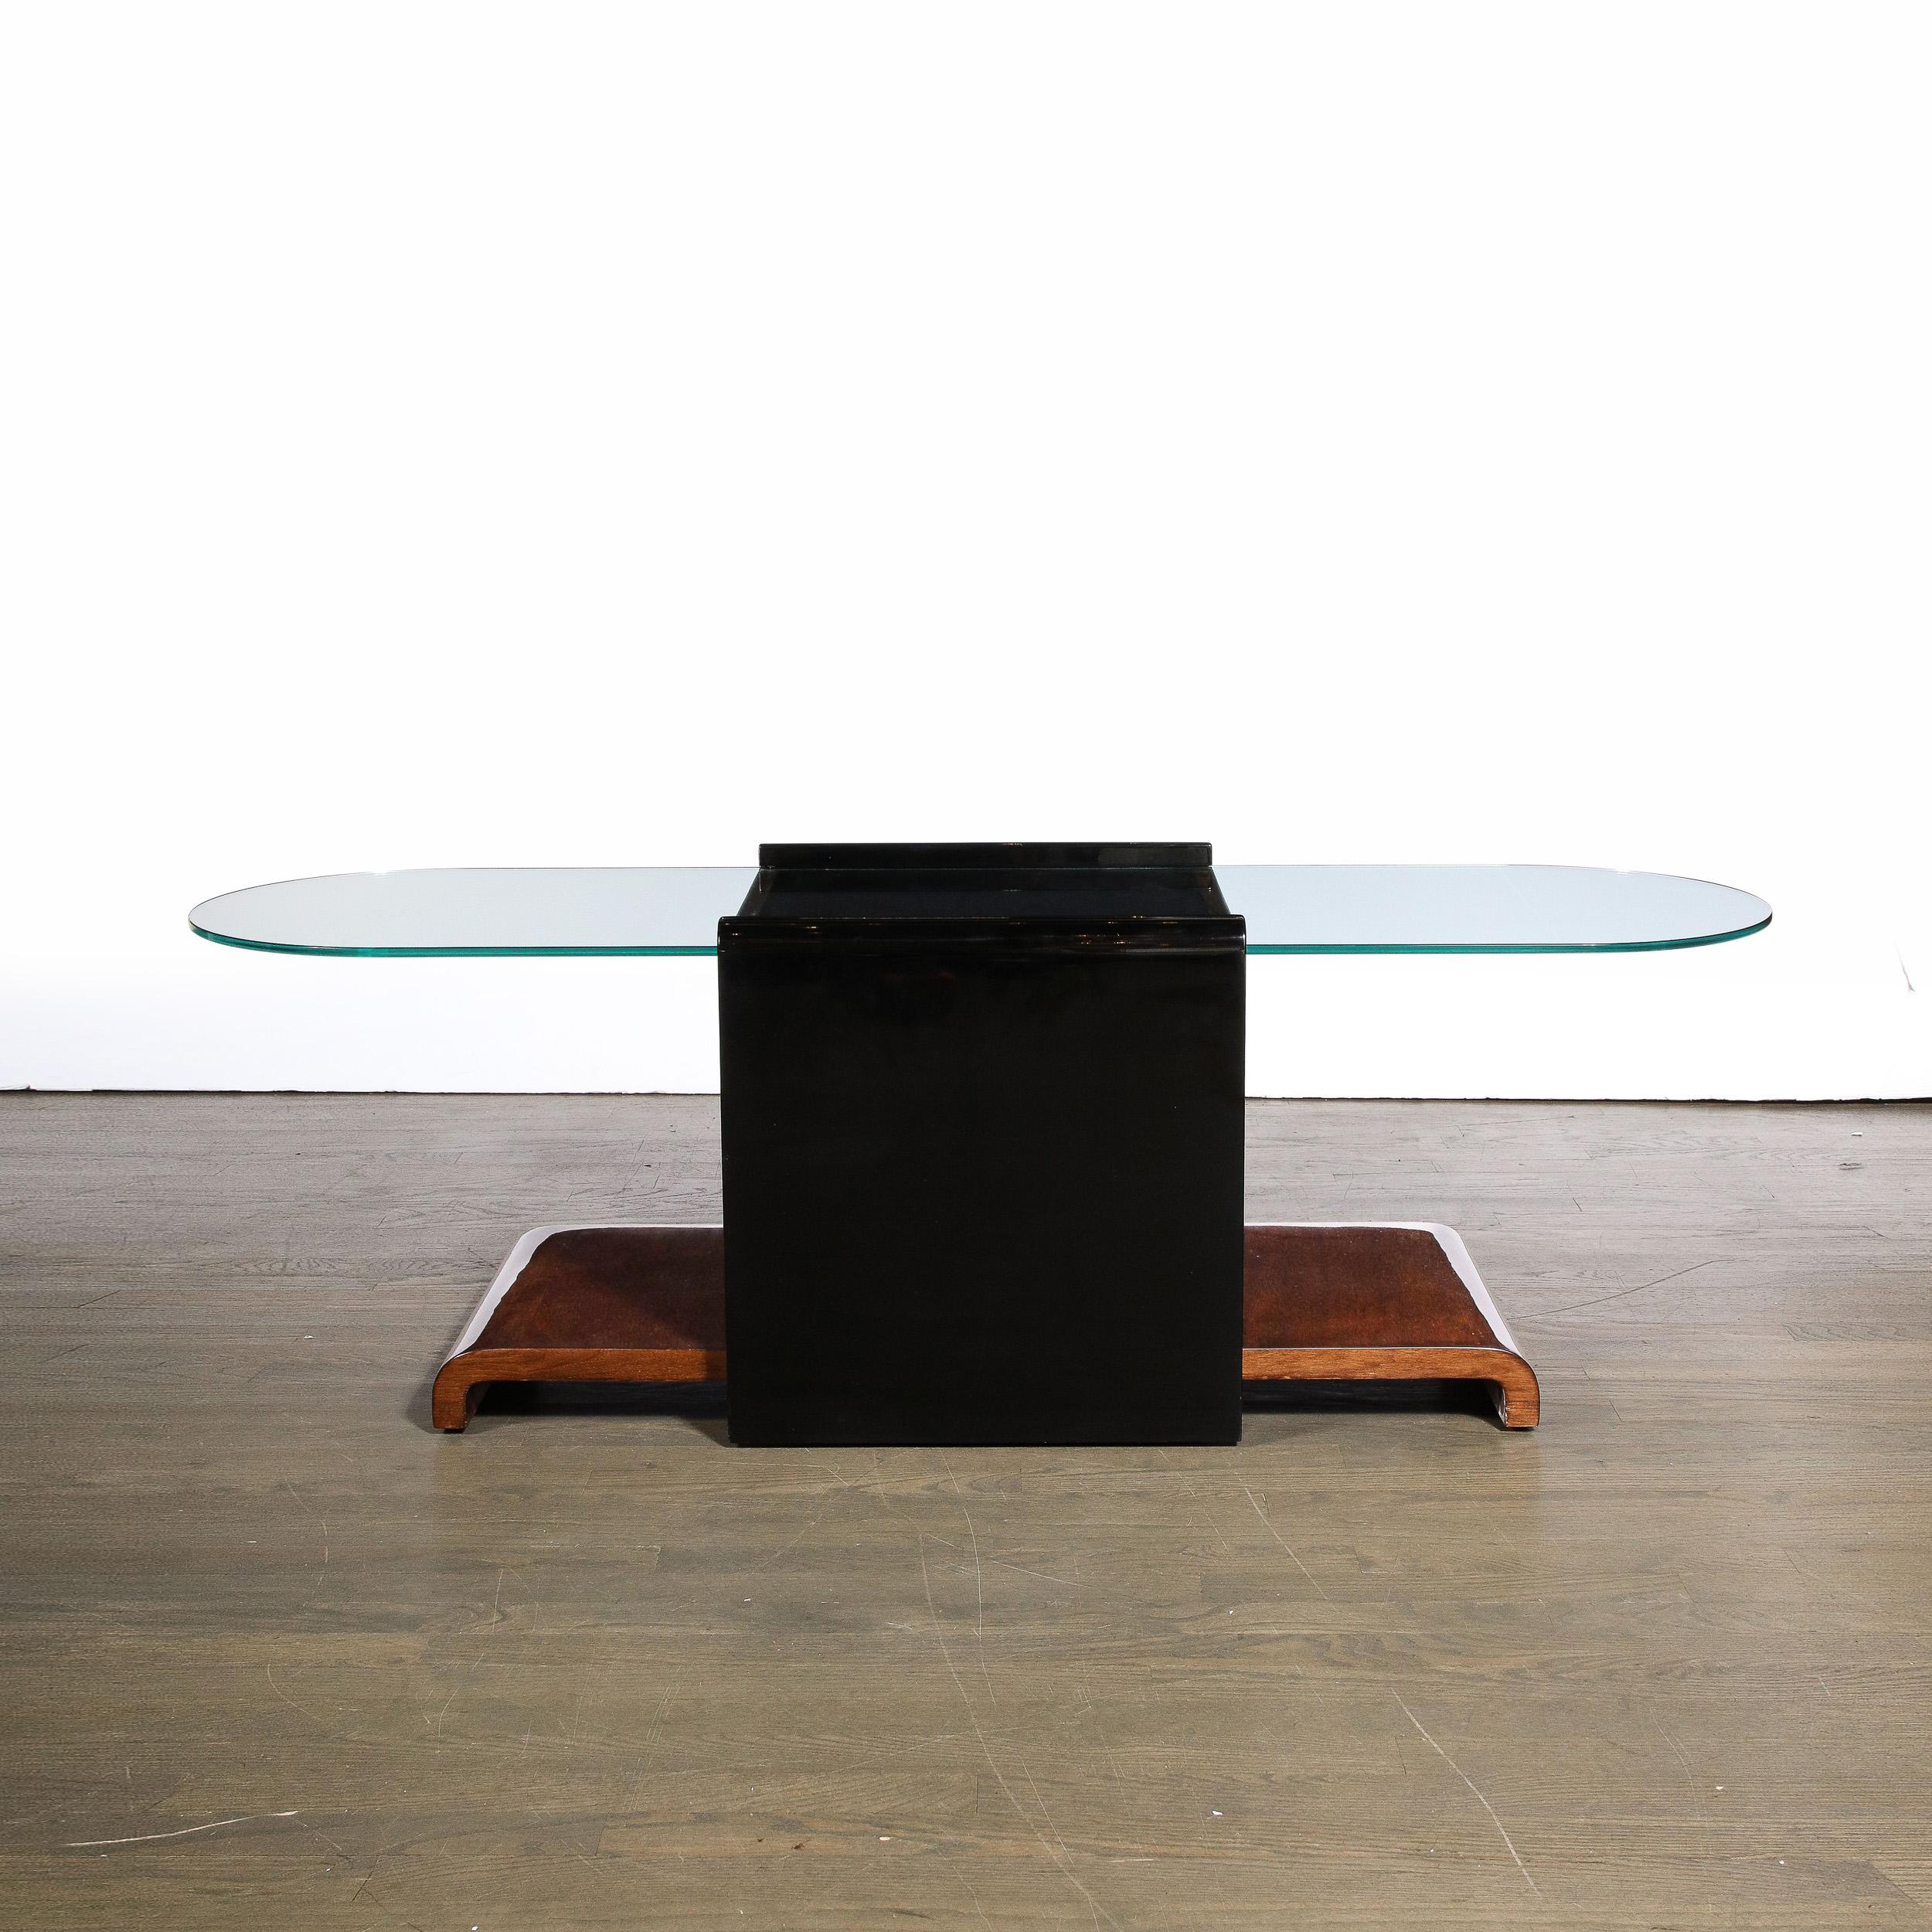 This sleek and highly sophisticated Art Deco Machine Age Bullet Form Cocktail Table in Bookmatched Walnut W/ Black Lacquer Accents & Glass Top originates from the United States, Circa 1935. The table features an elongated oval shaped surface in